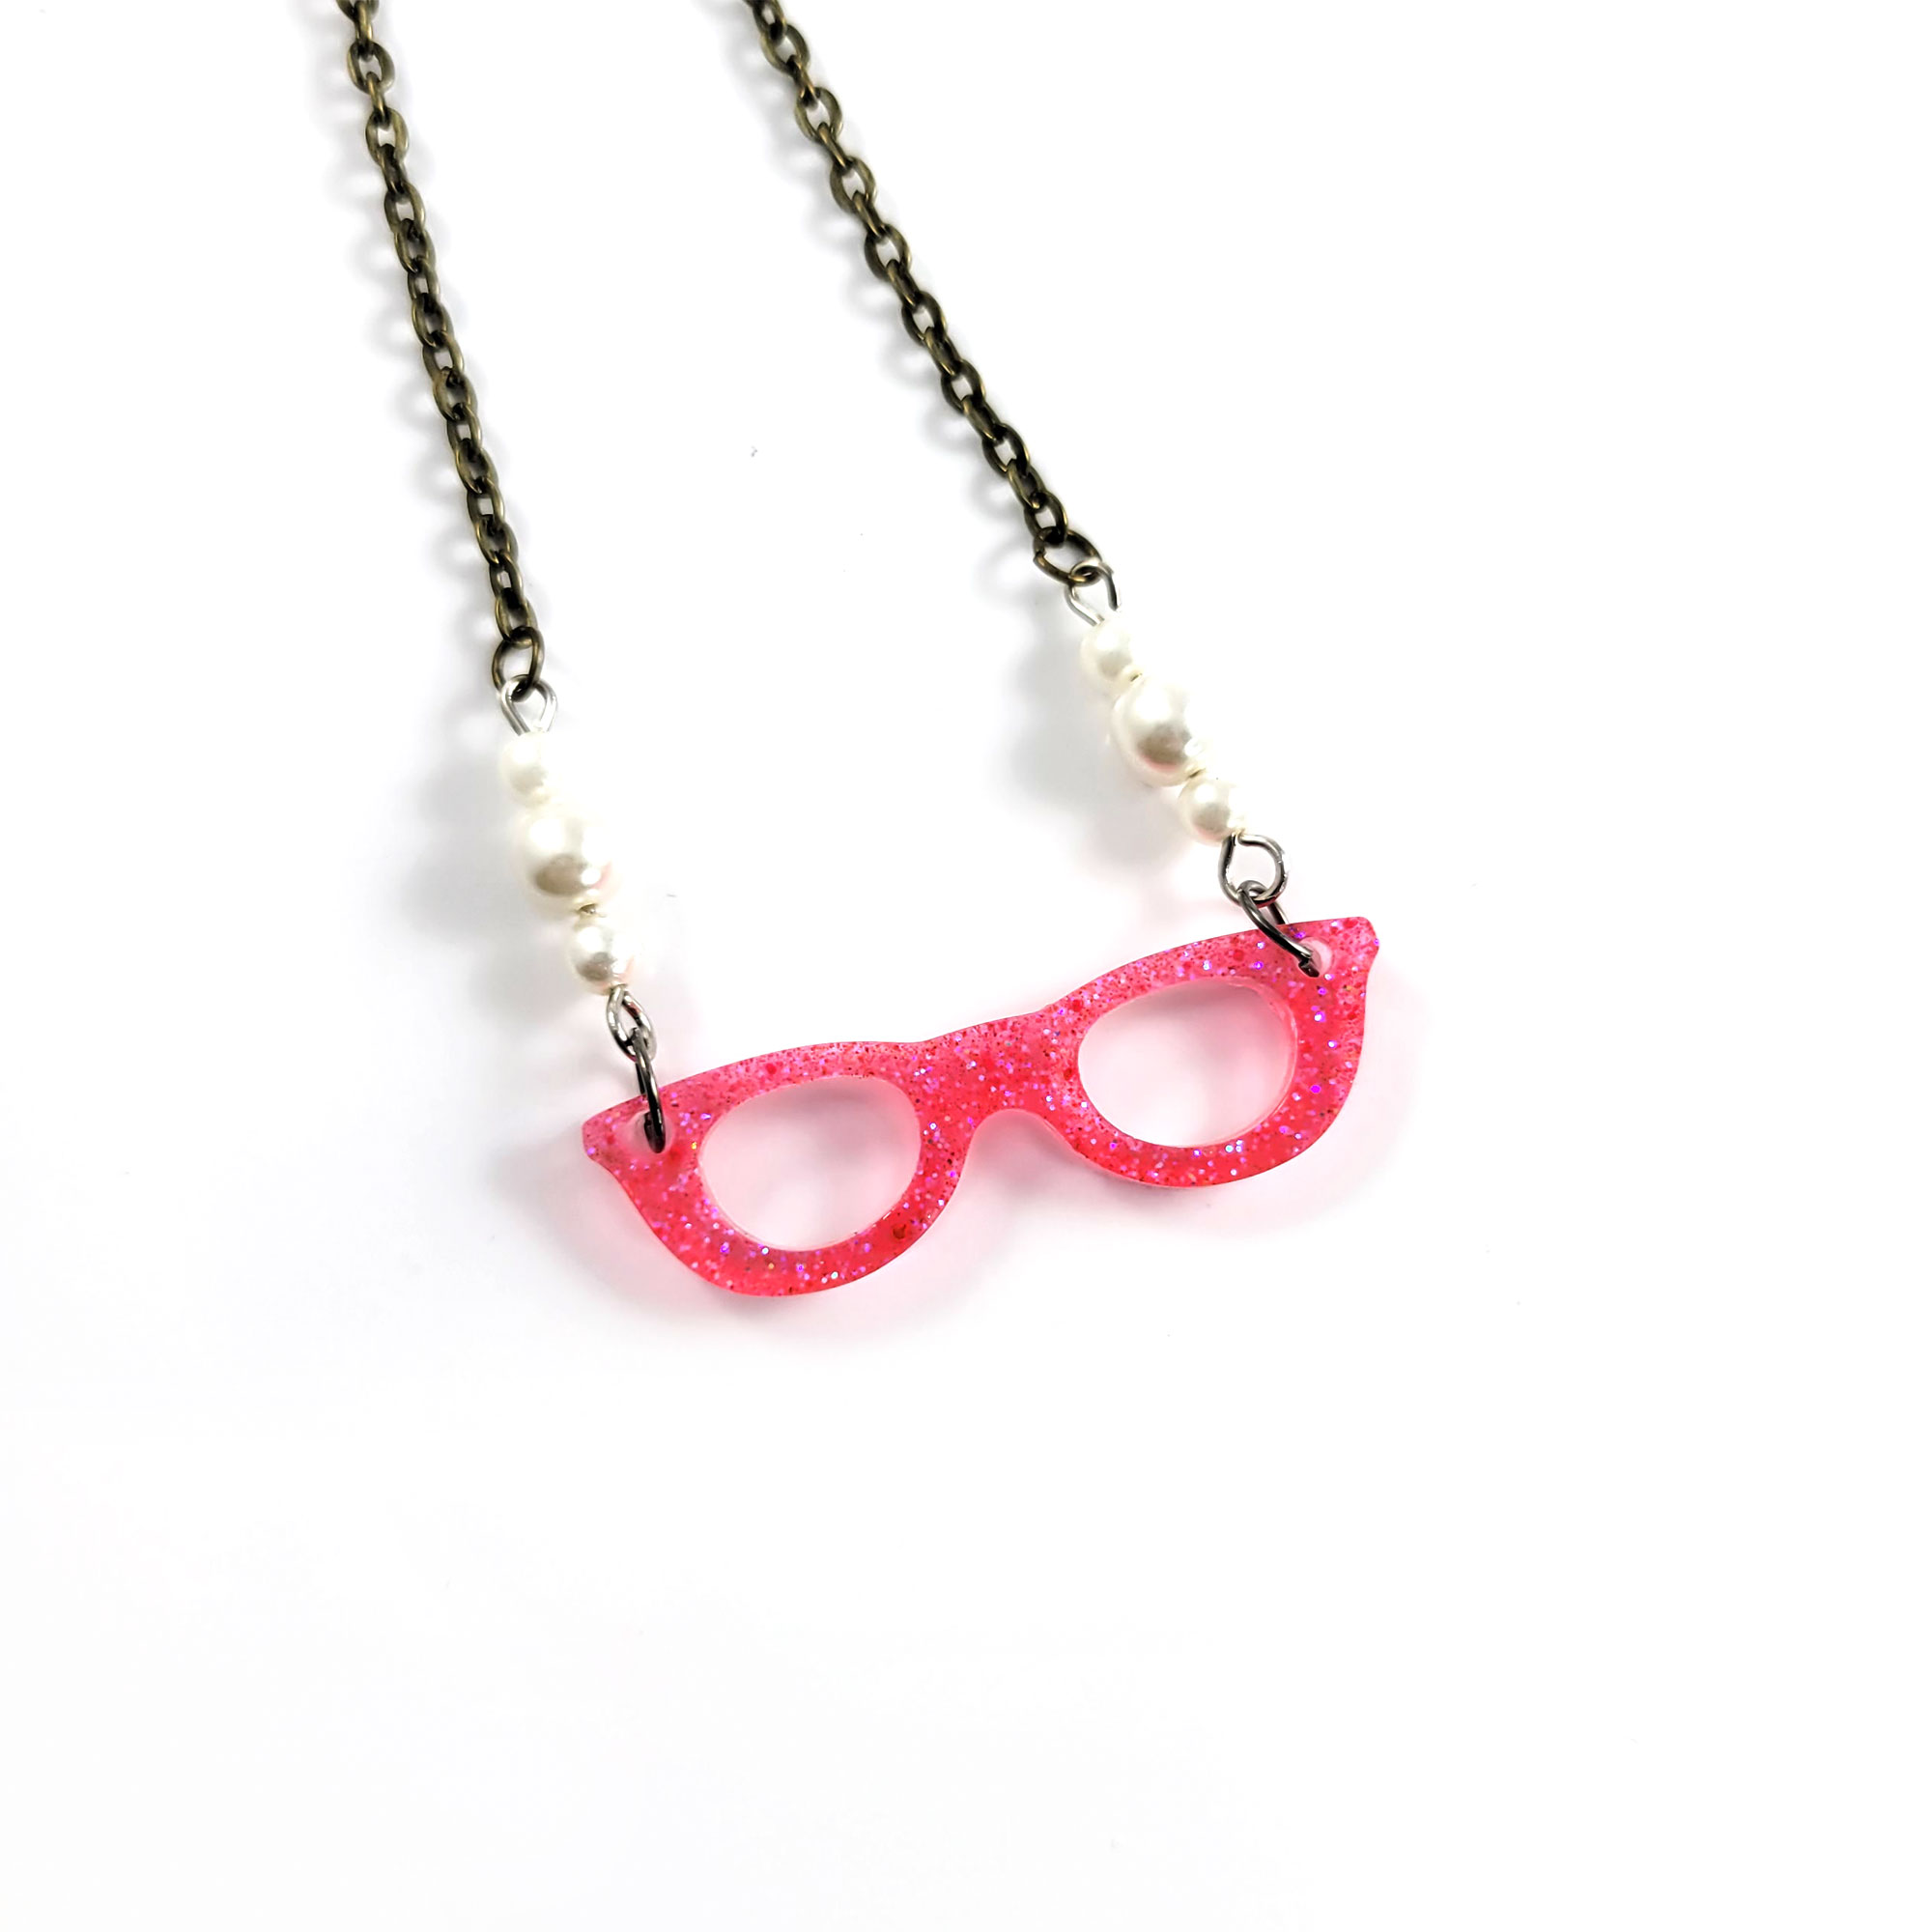 Geeks Who Wear Glasses Necklace by Wilde Designs